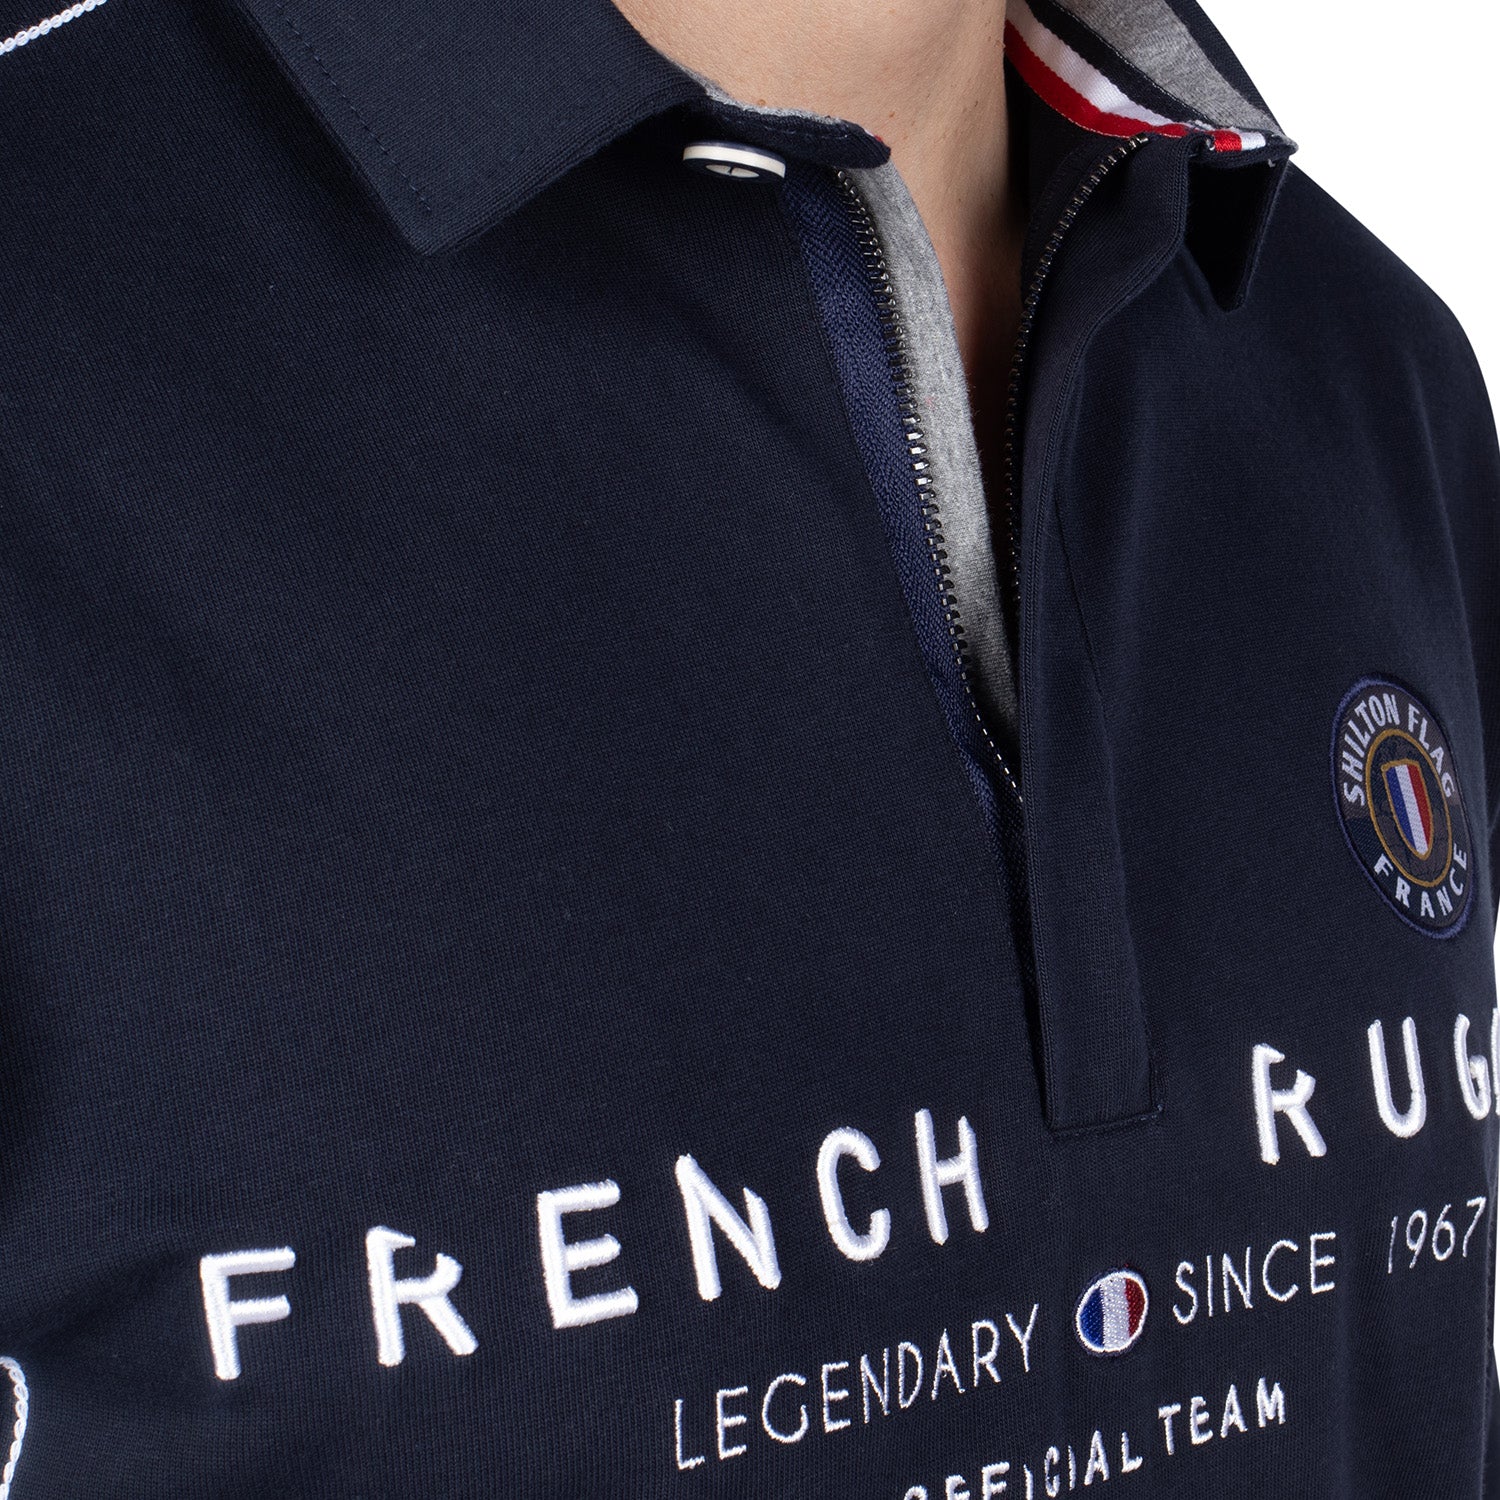 Polo rugby french legend